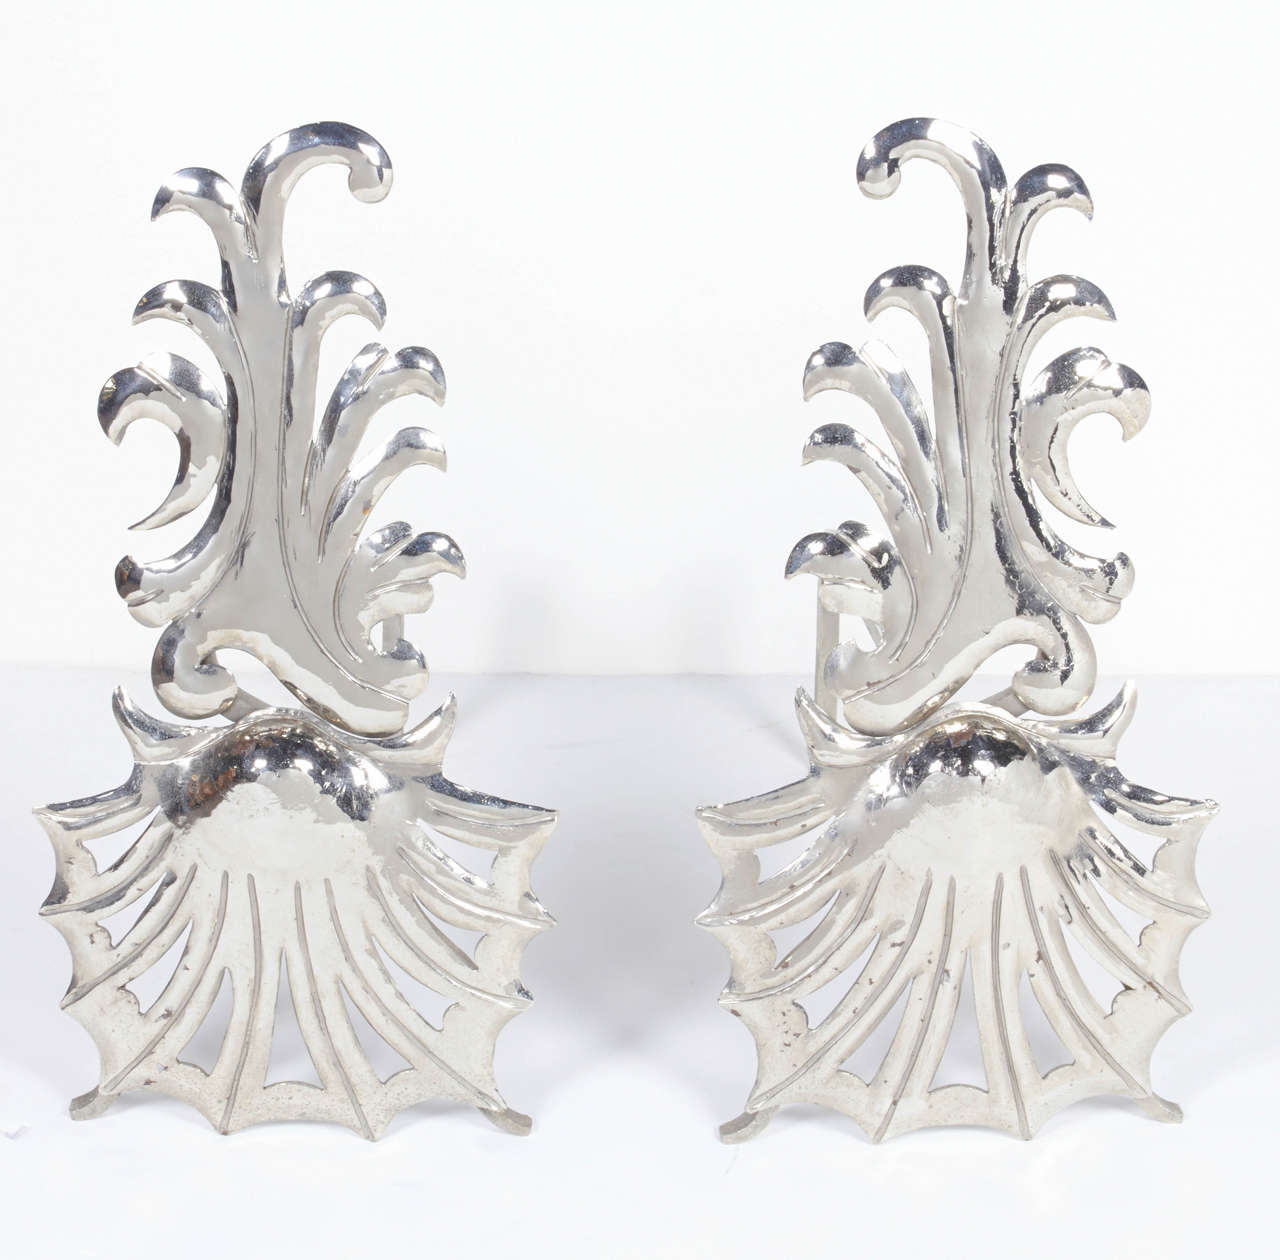 Elegant fireplace andirons with coastal design featuring stylized shell and wave motifs.  Handcrafted from hammered steel and cast iron, features pierced metal cut-outs with nickel plated finish.  These original Art Deco / Hollywood Regency style